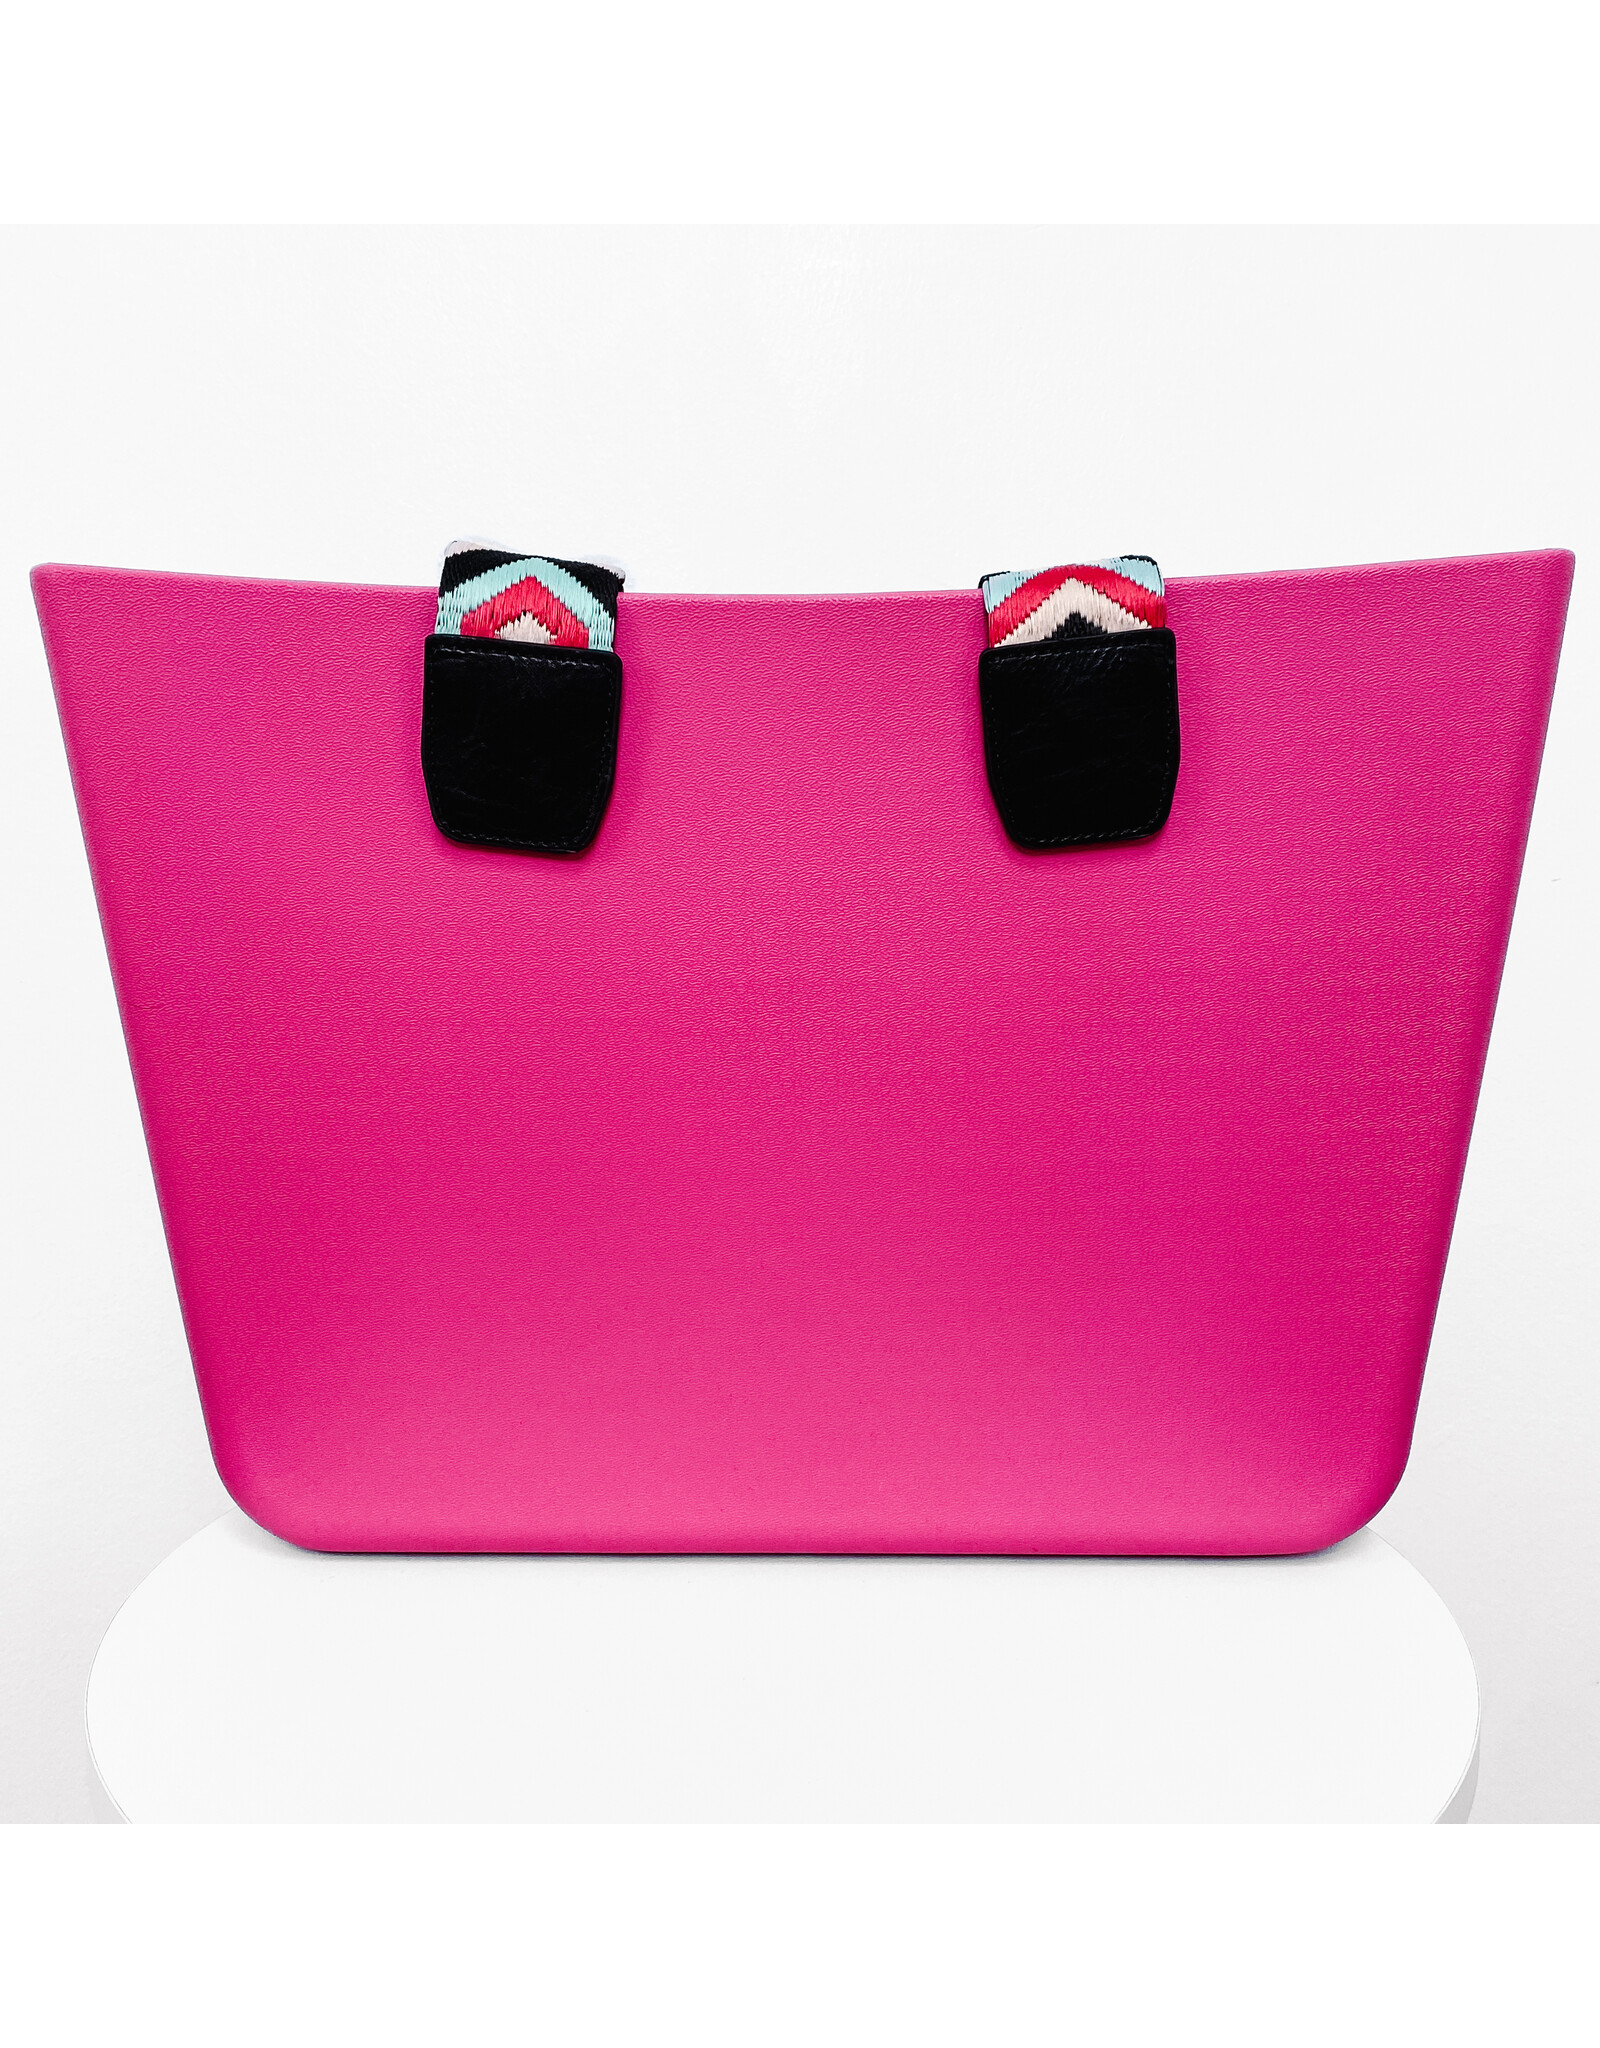 Carrie All Tote - Hot Pink w/ Mint Fuchsia Guitar Strap Handles